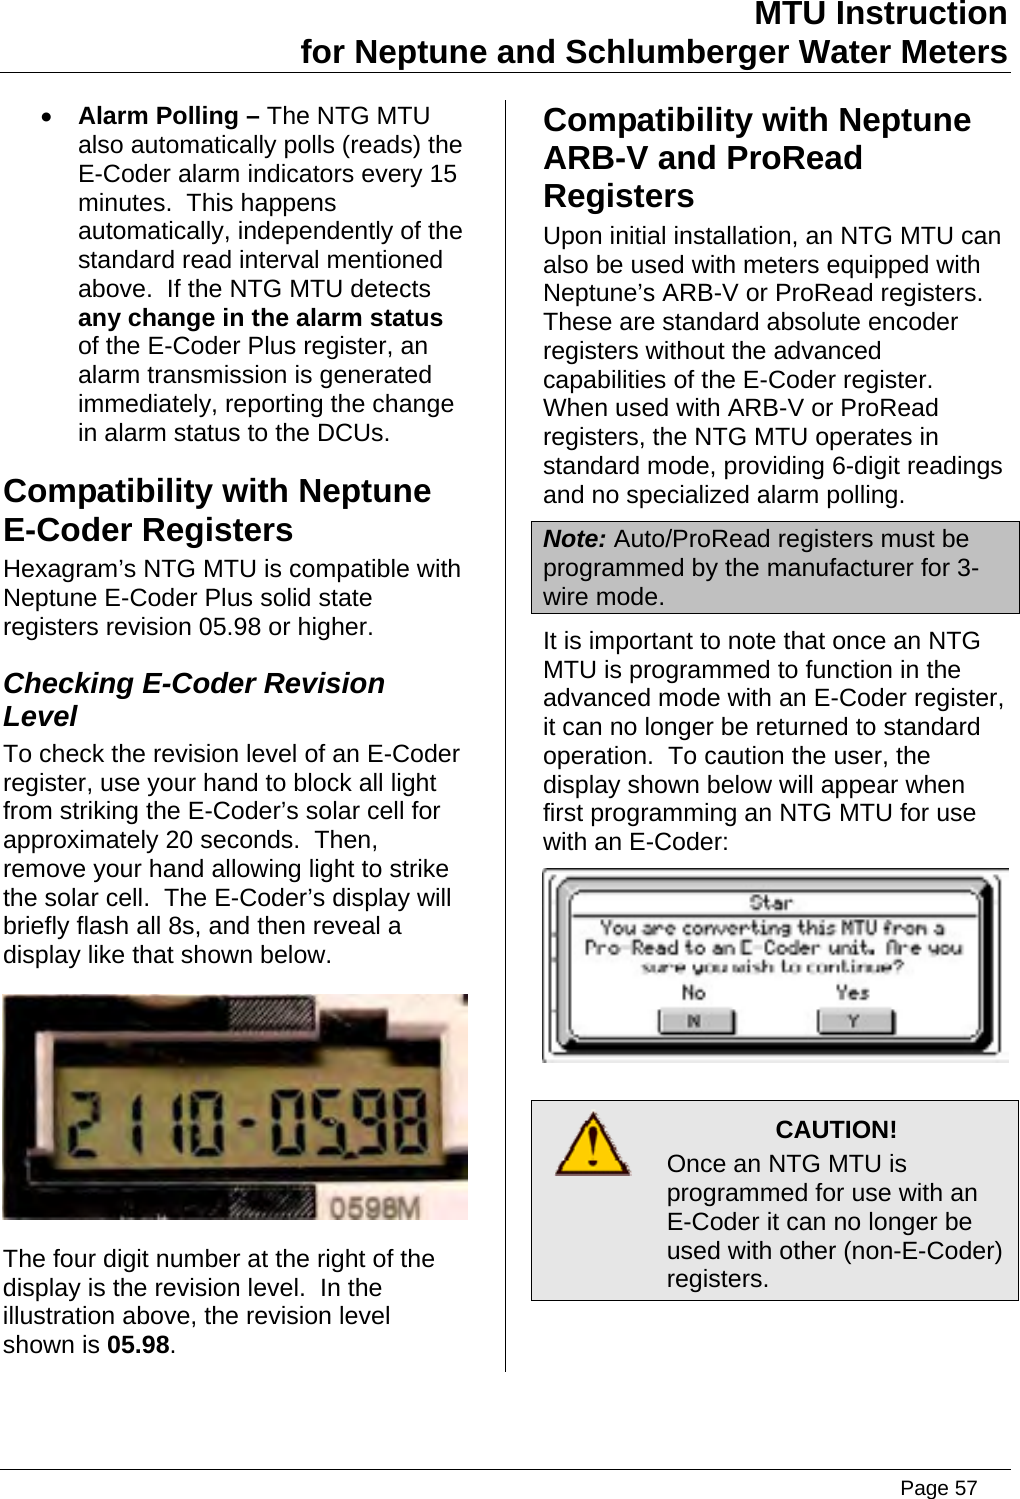 MTU Instruction for Neptune and Schlumberger Water Meters • Alarm Polling – The NTG MTU also automatically polls (reads) the E-Coder alarm indicators every 15 minutes.  This happens automatically, independently of the standard read interval mentioned above.  If the NTG MTU detects any change in the alarm status of the E-Coder Plus register, an alarm transmission is generated immediately, reporting the change in alarm status to the DCUs. Compatibility with Neptune E-Coder Registers Hexagram’s NTG MTU is compatible with Neptune E-Coder Plus solid state registers revision 05.98 or higher. Checking E-Coder Revision Level To check the revision level of an E-Coder register, use your hand to block all light from striking the E-Coder’s solar cell for approximately 20 seconds.  Then, remove your hand allowing light to strike the solar cell.  The E-Coder’s display will briefly flash all 8s, and then reveal a display like that shown below.  The four digit number at the right of the display is the revision level.  In the illustration above, the revision level shown is 05.98. Compatibility with Neptune ARB-V and ProRead Registers Upon initial installation, an NTG MTU can also be used with meters equipped with Neptune’s ARB-V or ProRead registers.  These are standard absolute encoder registers without the advanced capabilities of the E-Coder register.  When used with ARB-V or ProRead registers, the NTG MTU operates in standard mode, providing 6-digit readings and no specialized alarm polling. Note: Auto/ProRead registers must be programmed by the manufacturer for 3-wire mode. It is important to note that once an NTG MTU is programmed to function in the advanced mode with an E-Coder register, it can no longer be returned to standard operation.  To caution the user, the display shown below will appear when first programming an NTG MTU for use with an E-Coder:   CAUTION! Once an NTG MTU is programmed for use with an E-Coder it can no longer be used with other (non-E-Coder) registers.   Page 57